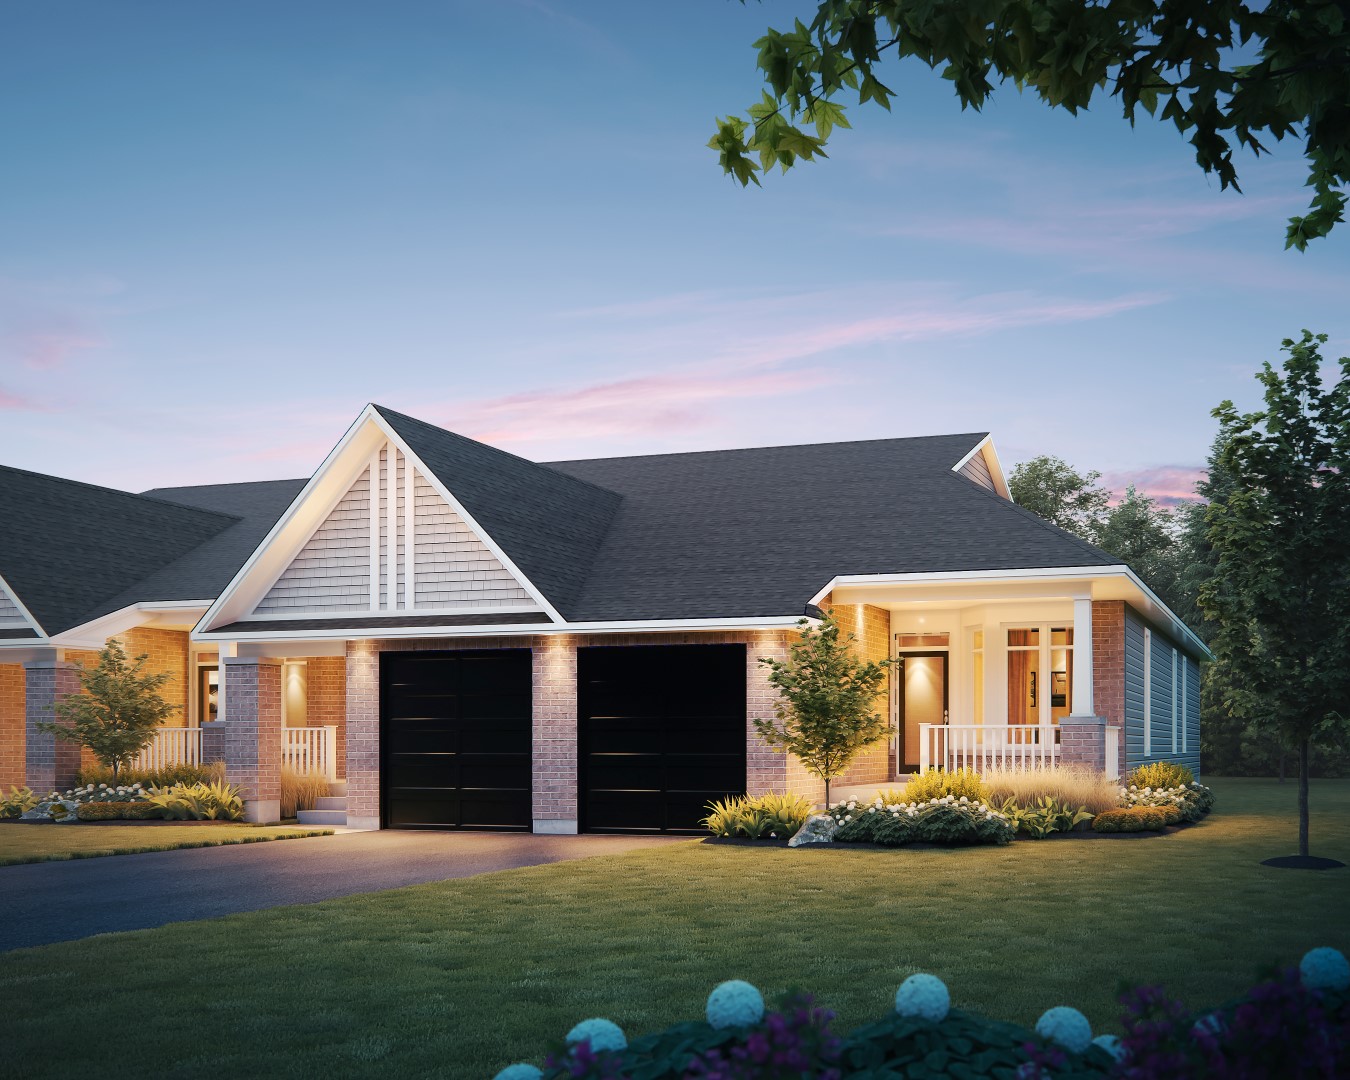 Swan (Middle) Bungalow Townhome Rendering